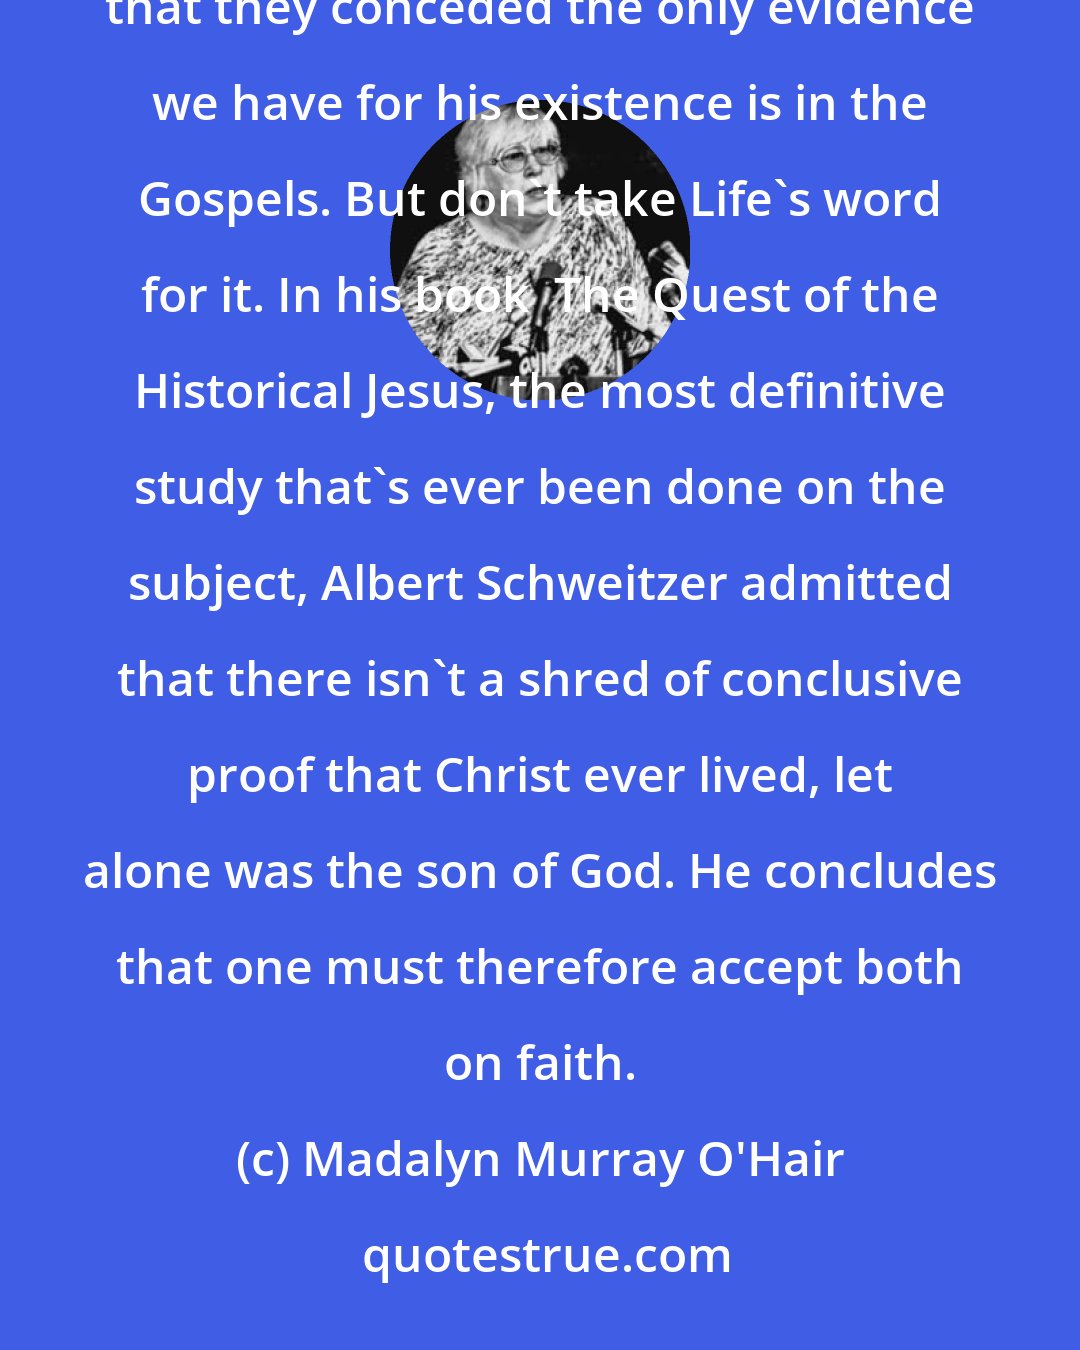 Madalyn Murray O'Hair: About six years ago, Life magazine ran an article on the historicity of Jesus and I was floored to find that they conceded the only evidence we have for his existence is in the Gospels. But don't take Life's word for it. In his book  The Quest of the Historical Jesus, the most definitive study that's ever been done on the subject, Albert Schweitzer admitted that there isn't a shred of conclusive proof that Christ ever lived, let alone was the son of God. He concludes that one must therefore accept both on faith.